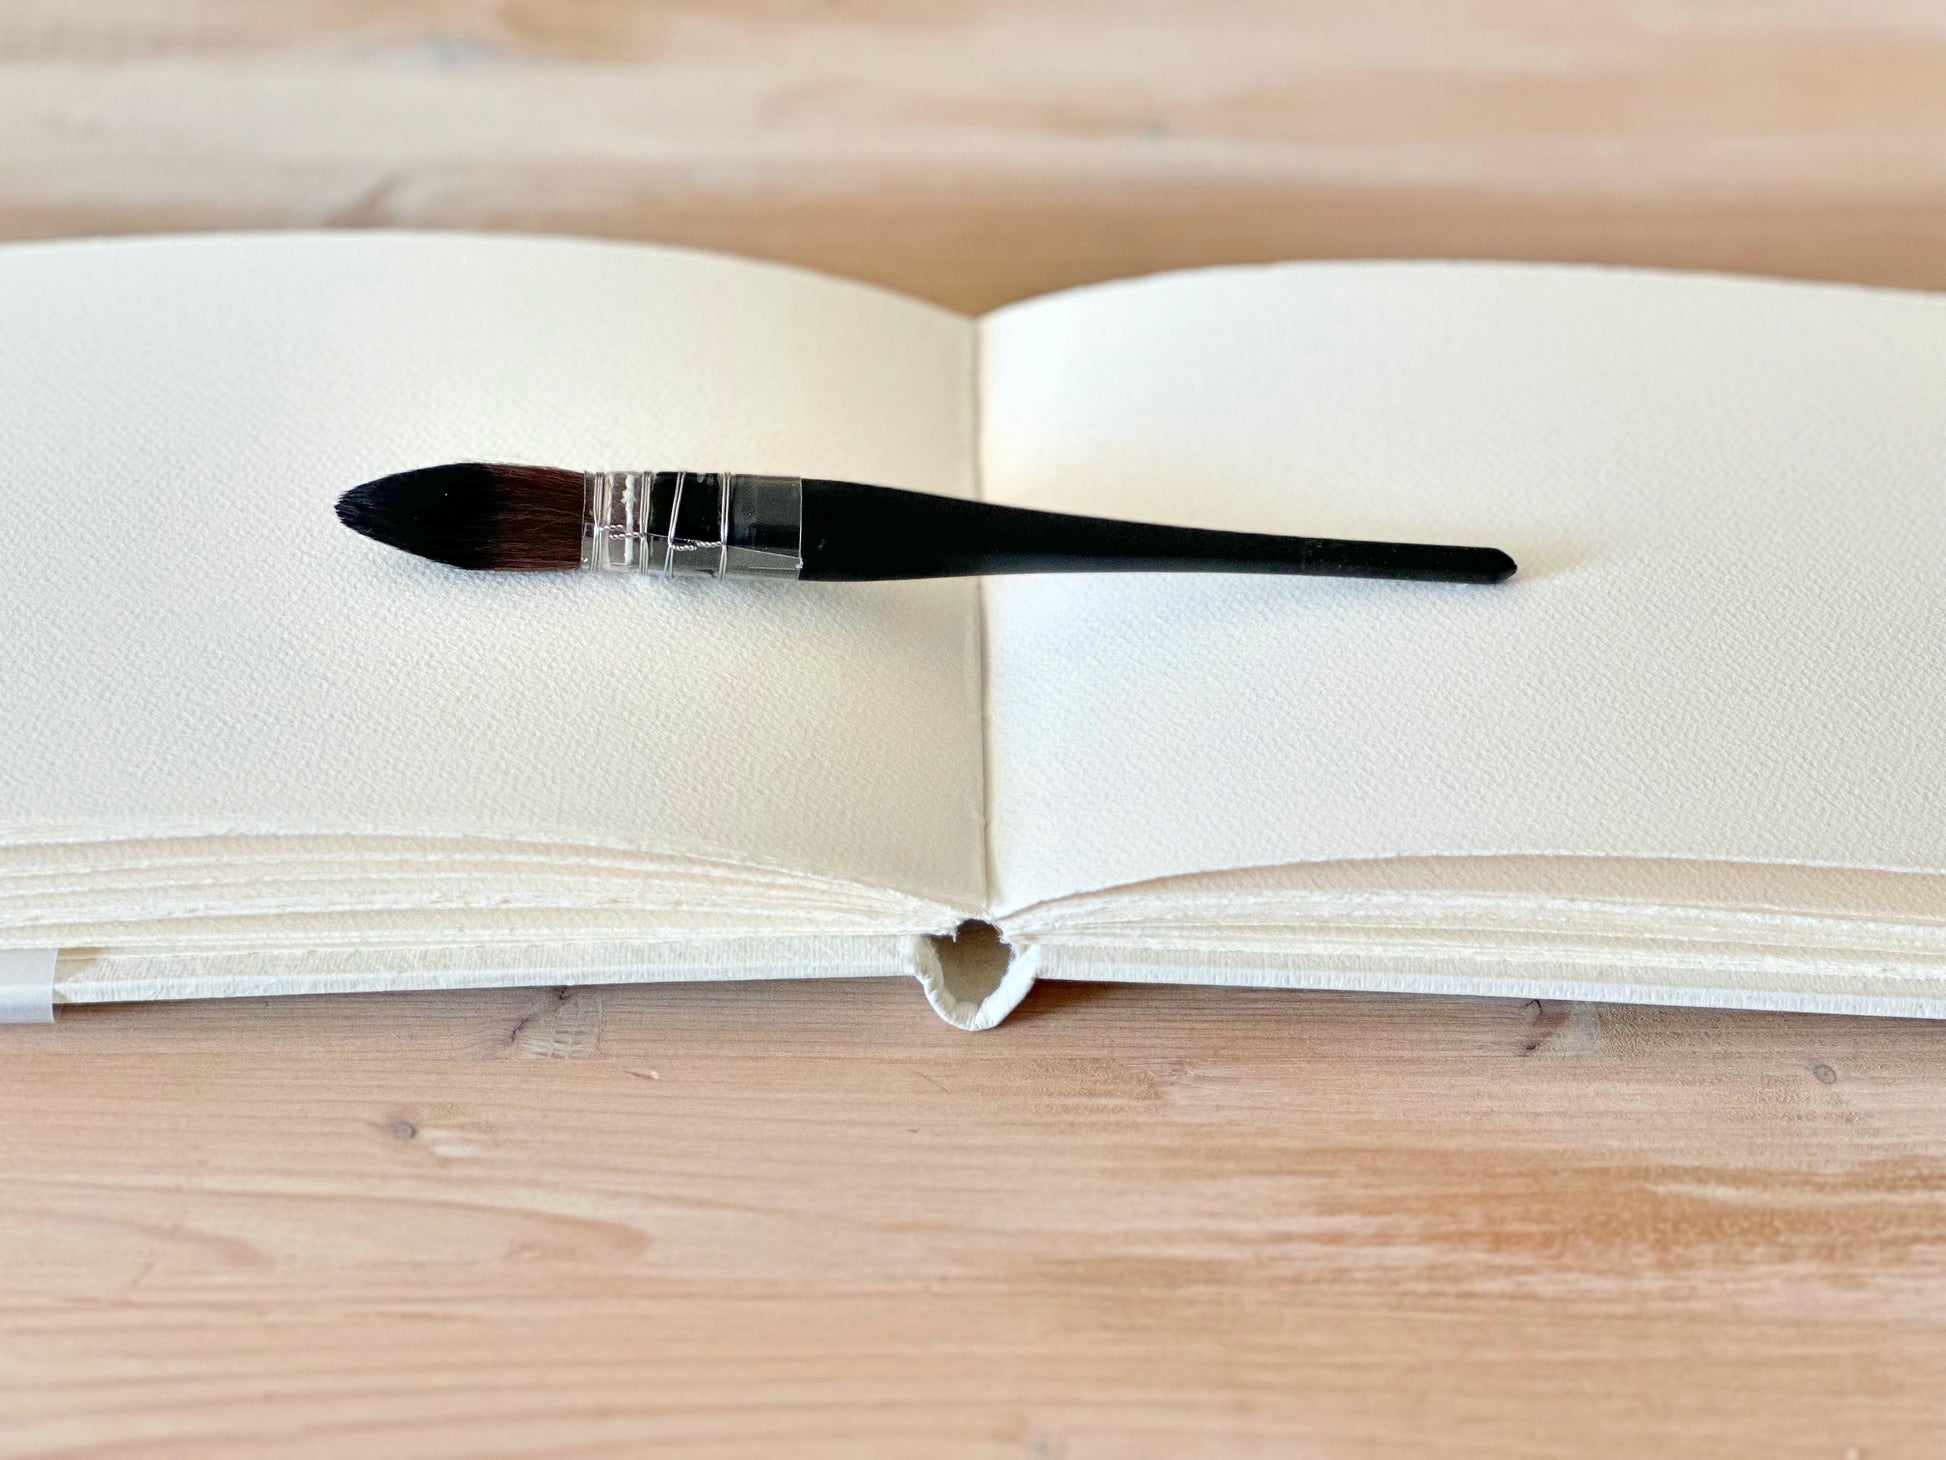 100% Cotton Lay Flat Sketchbook 